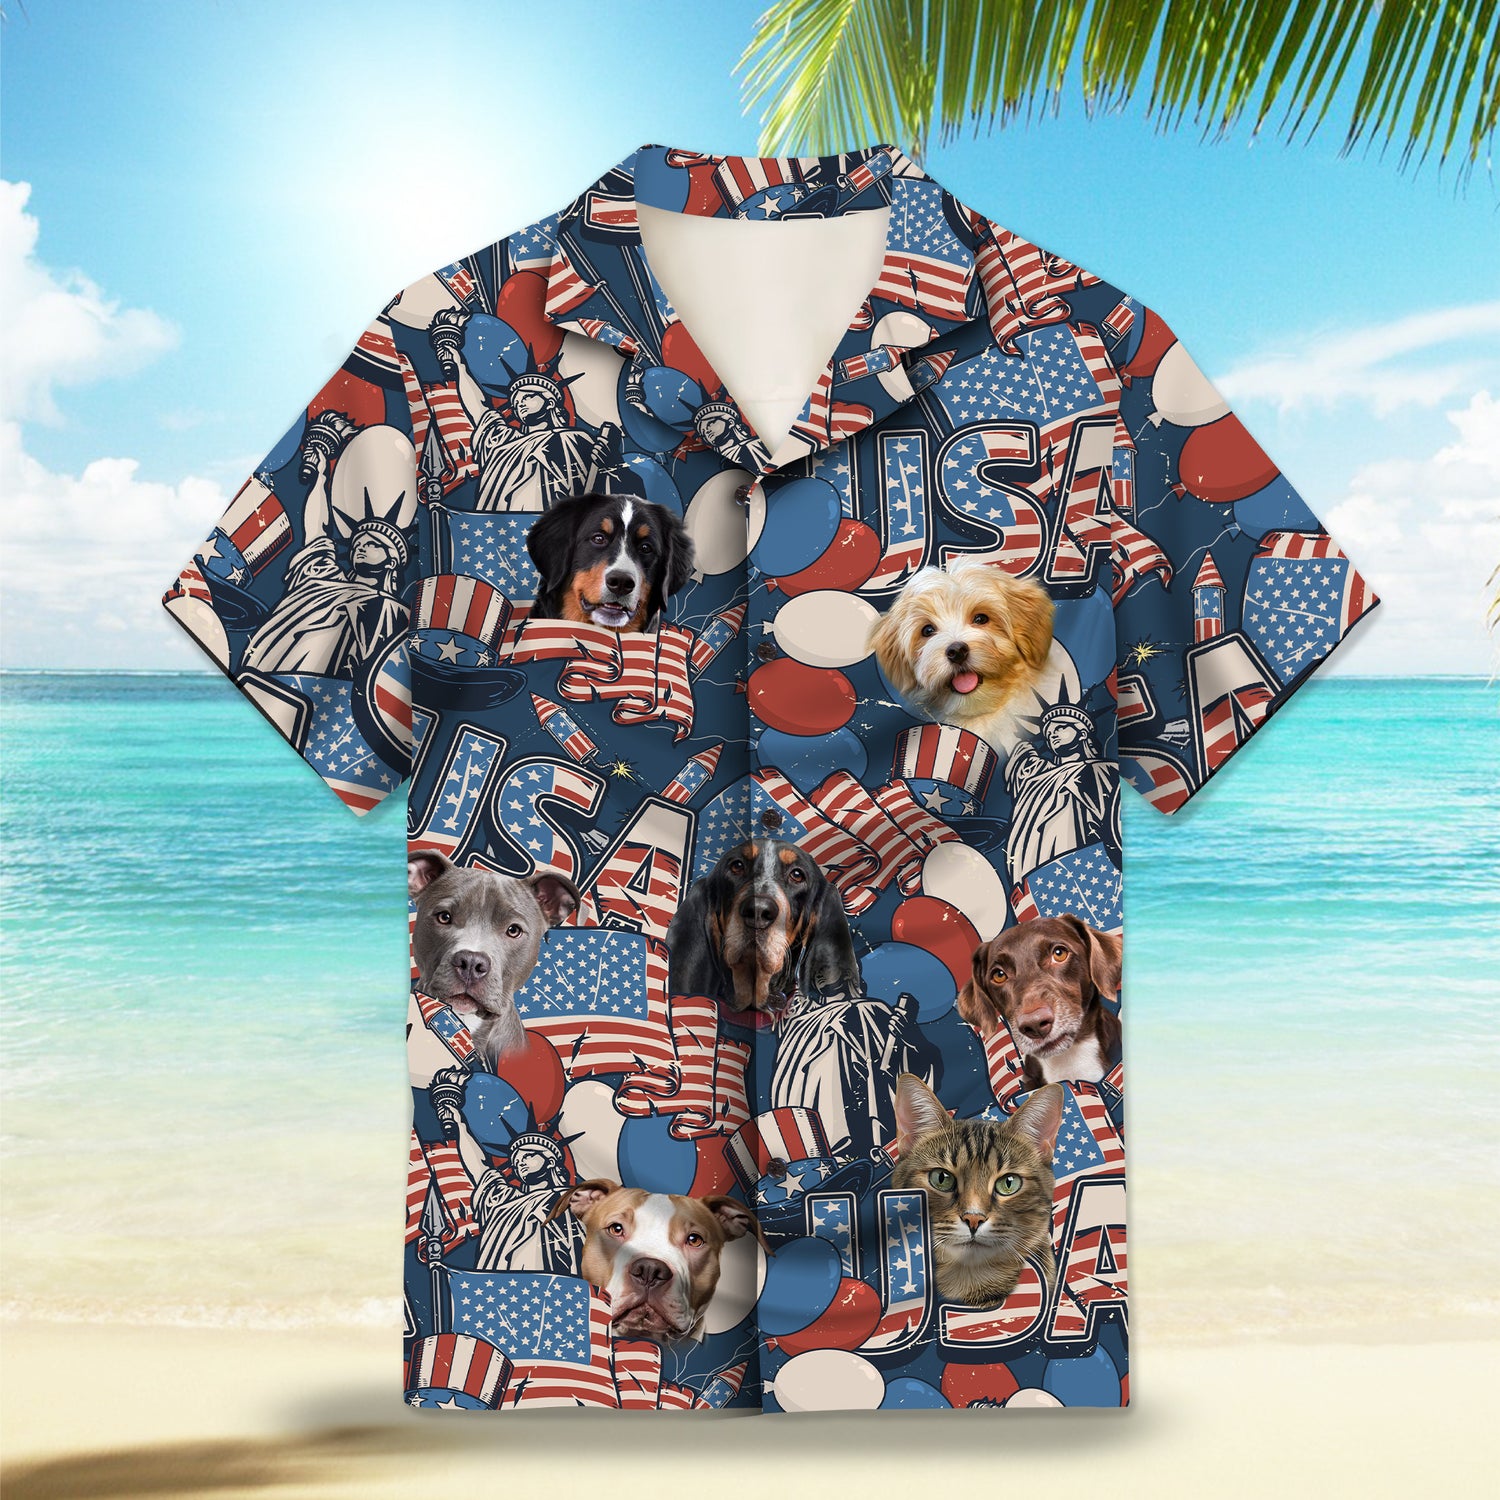 Image: Retro USA Flag Custom Hawaiian Shirts. Featuring vintage-inspired designs with the iconic USA flag motif in retro colors, perfect for patriotic celebrations like Independence Day. Alt text for accessibility.